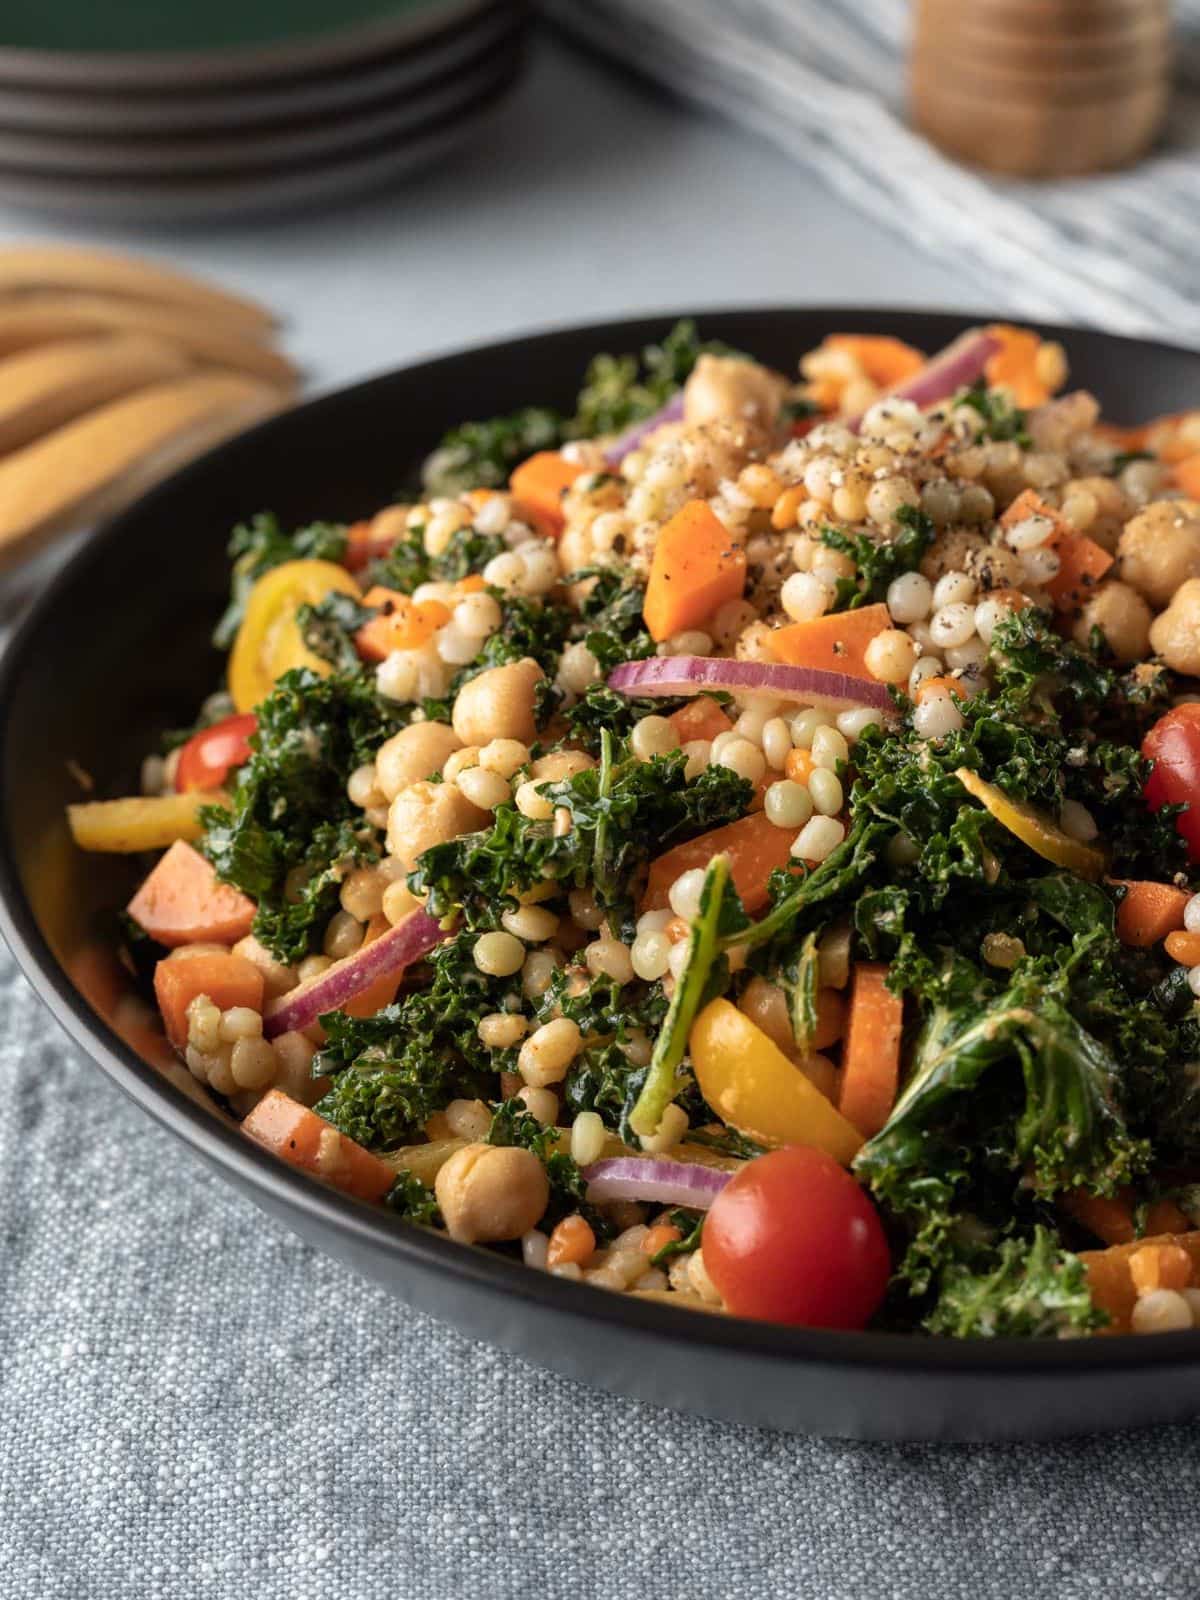 Spicy kale couscous chickpea salad in a black bowl on grey linen